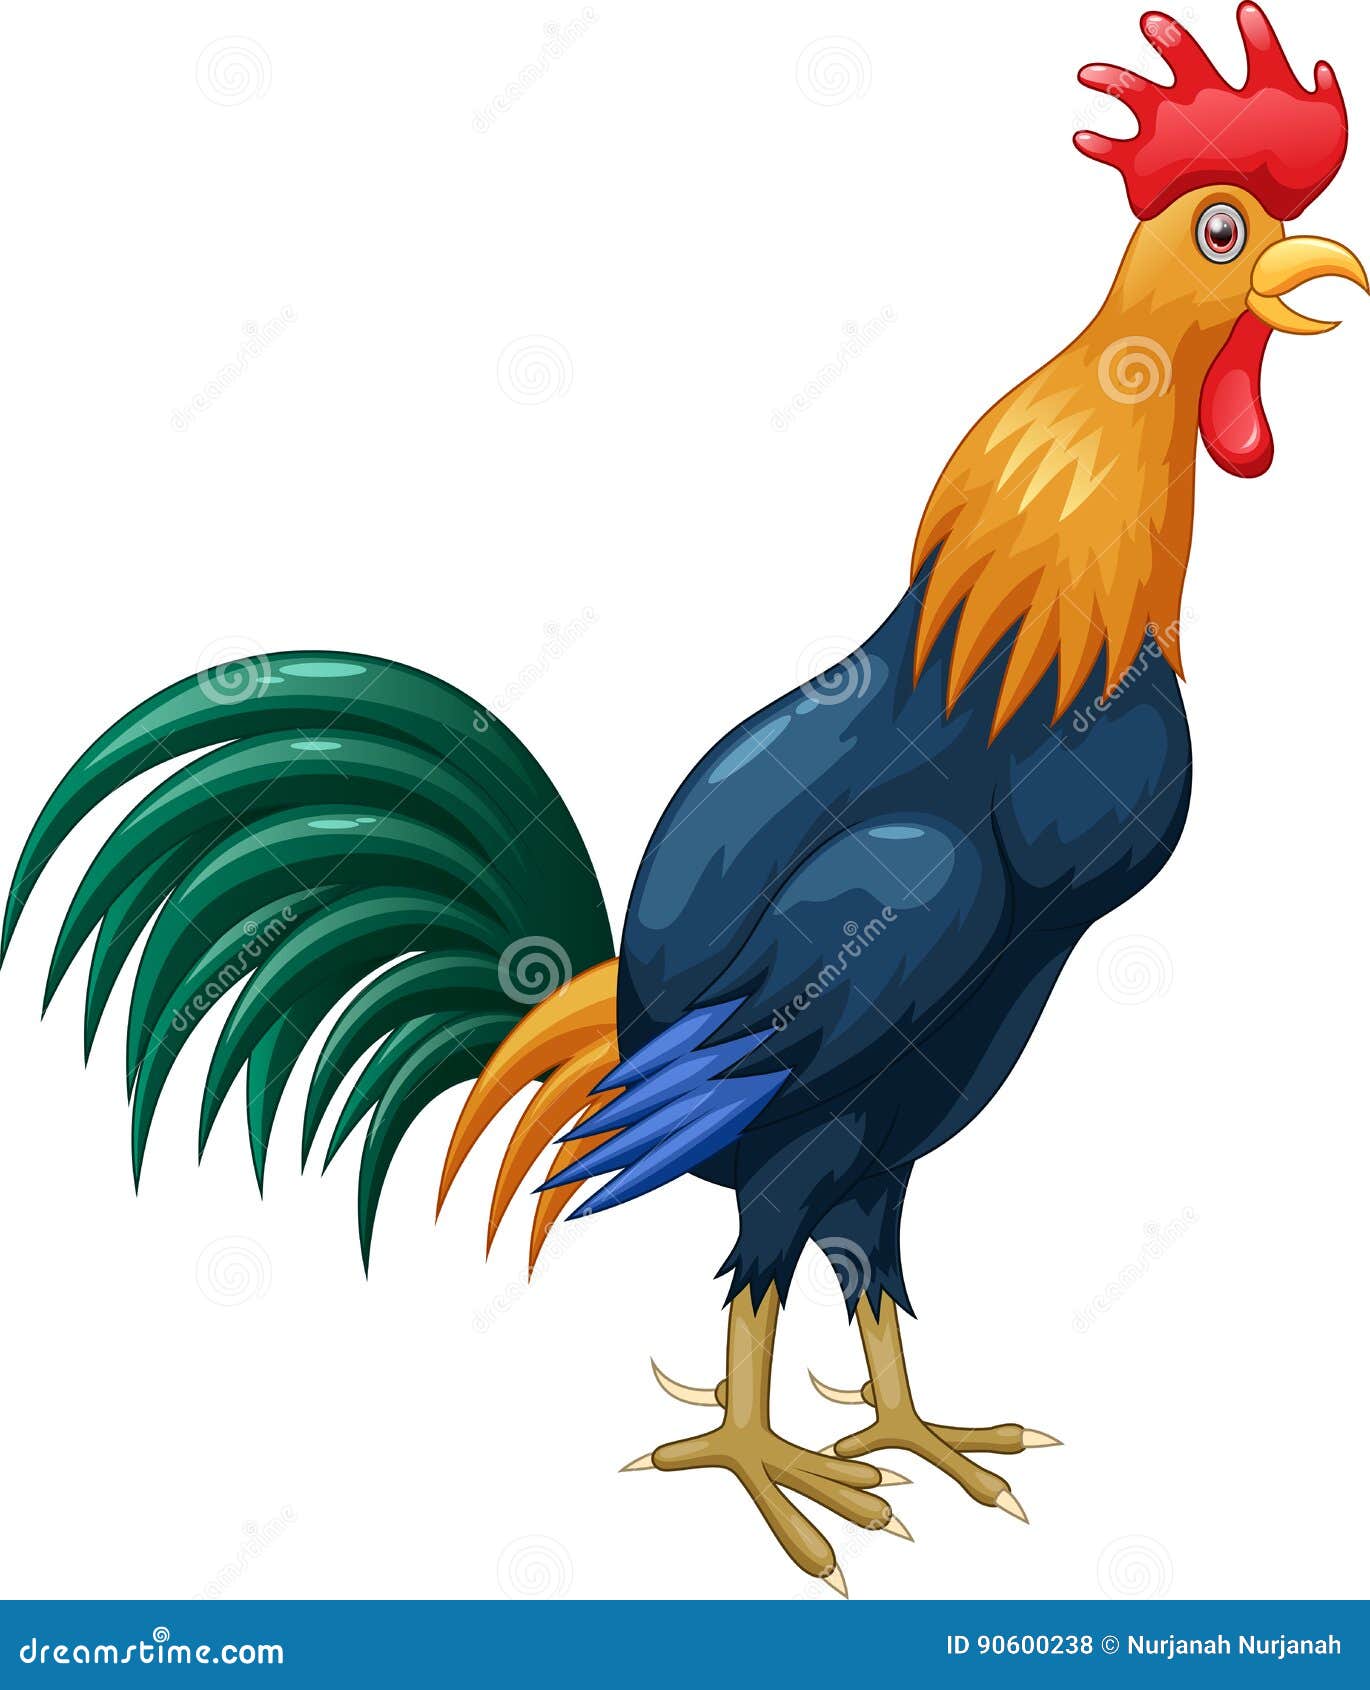 Cute rooster cartoon stock vector. Illustration of thumbs - 90600238